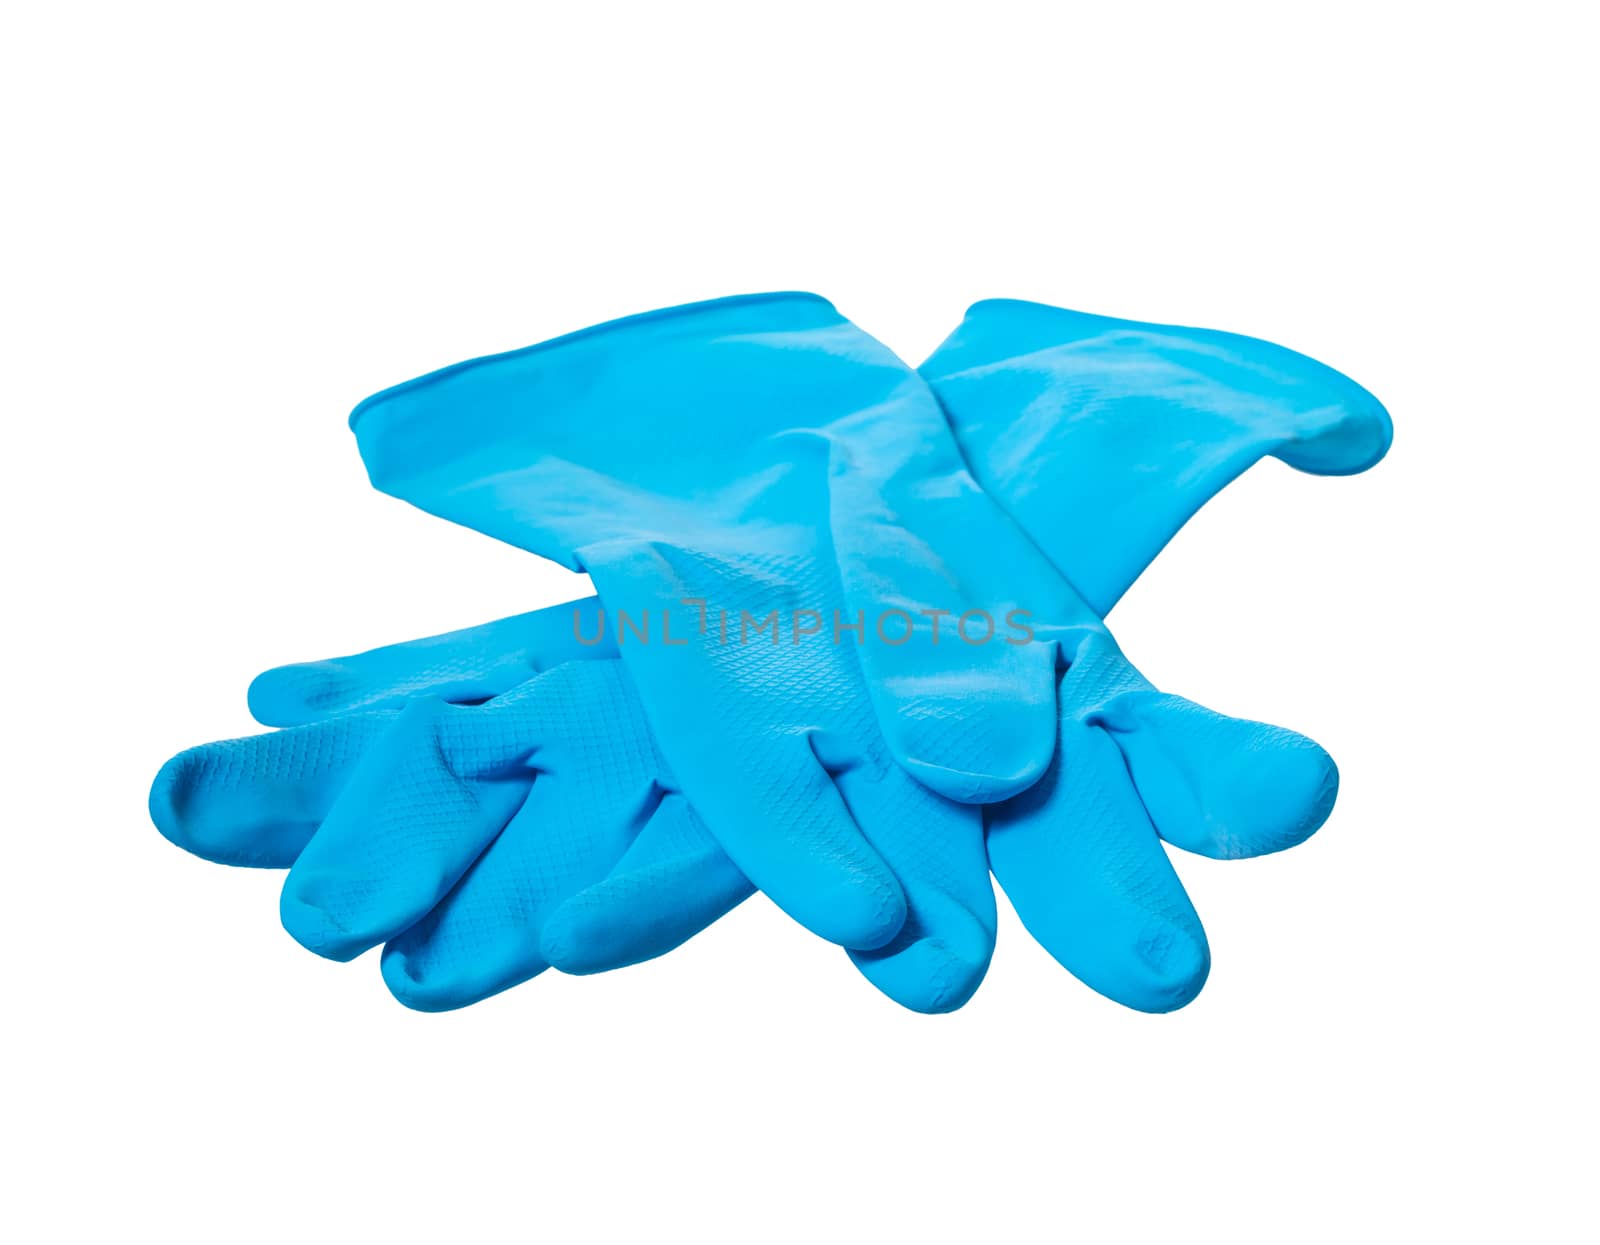 new rubber gloves on white isolated background